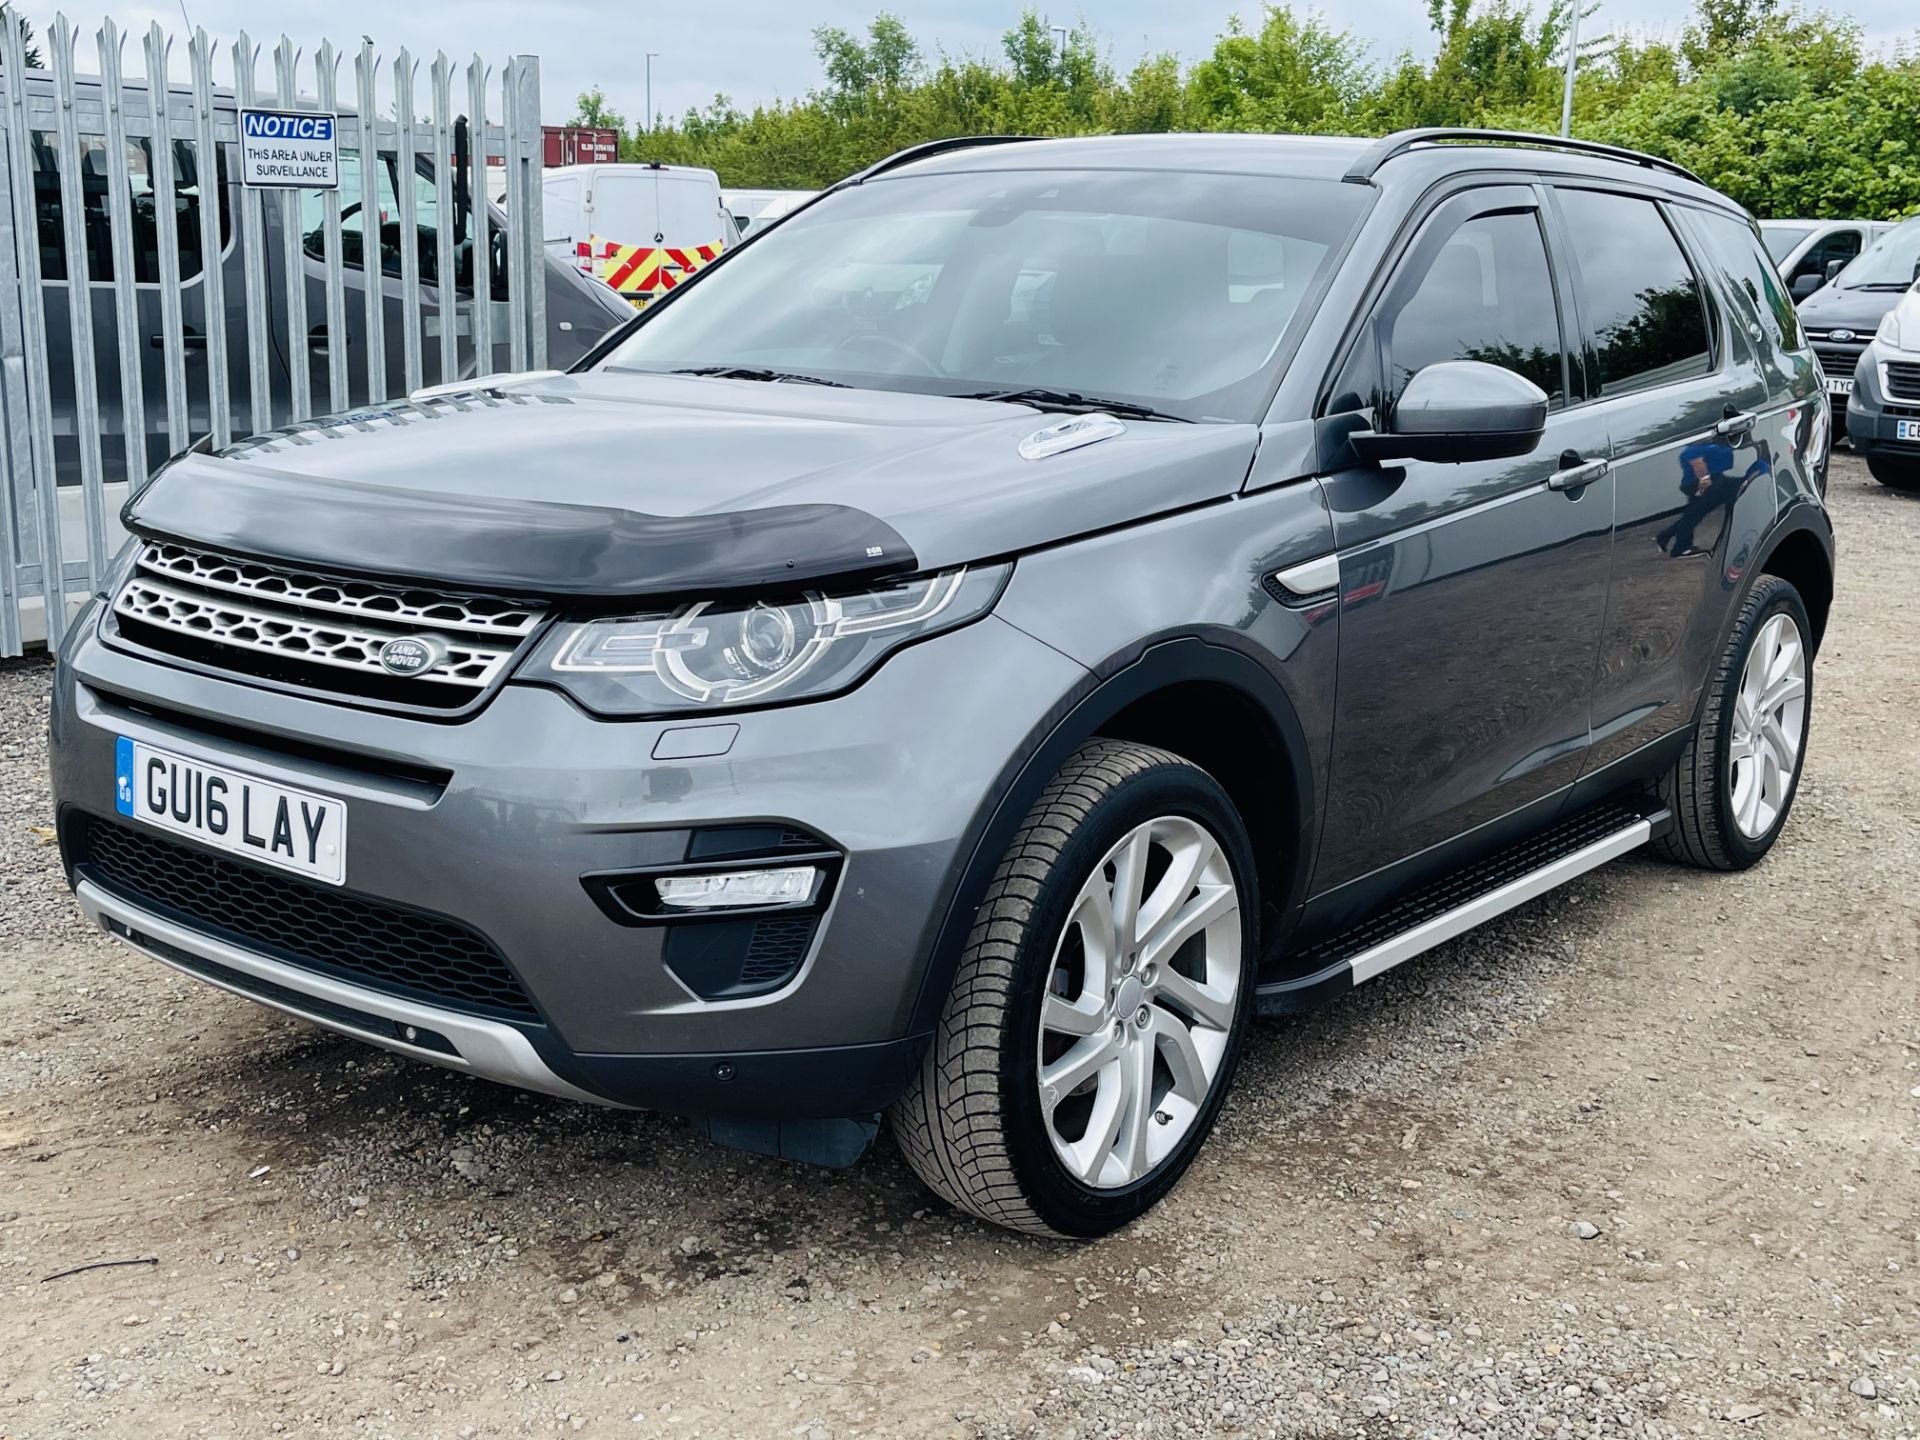 ** ON SALE **Land Rover Discovery sport 2.0 TD4 HSE 2016 '16 Reg' 7 seats - Sat Nav - Euro 6 - - Image 4 of 35